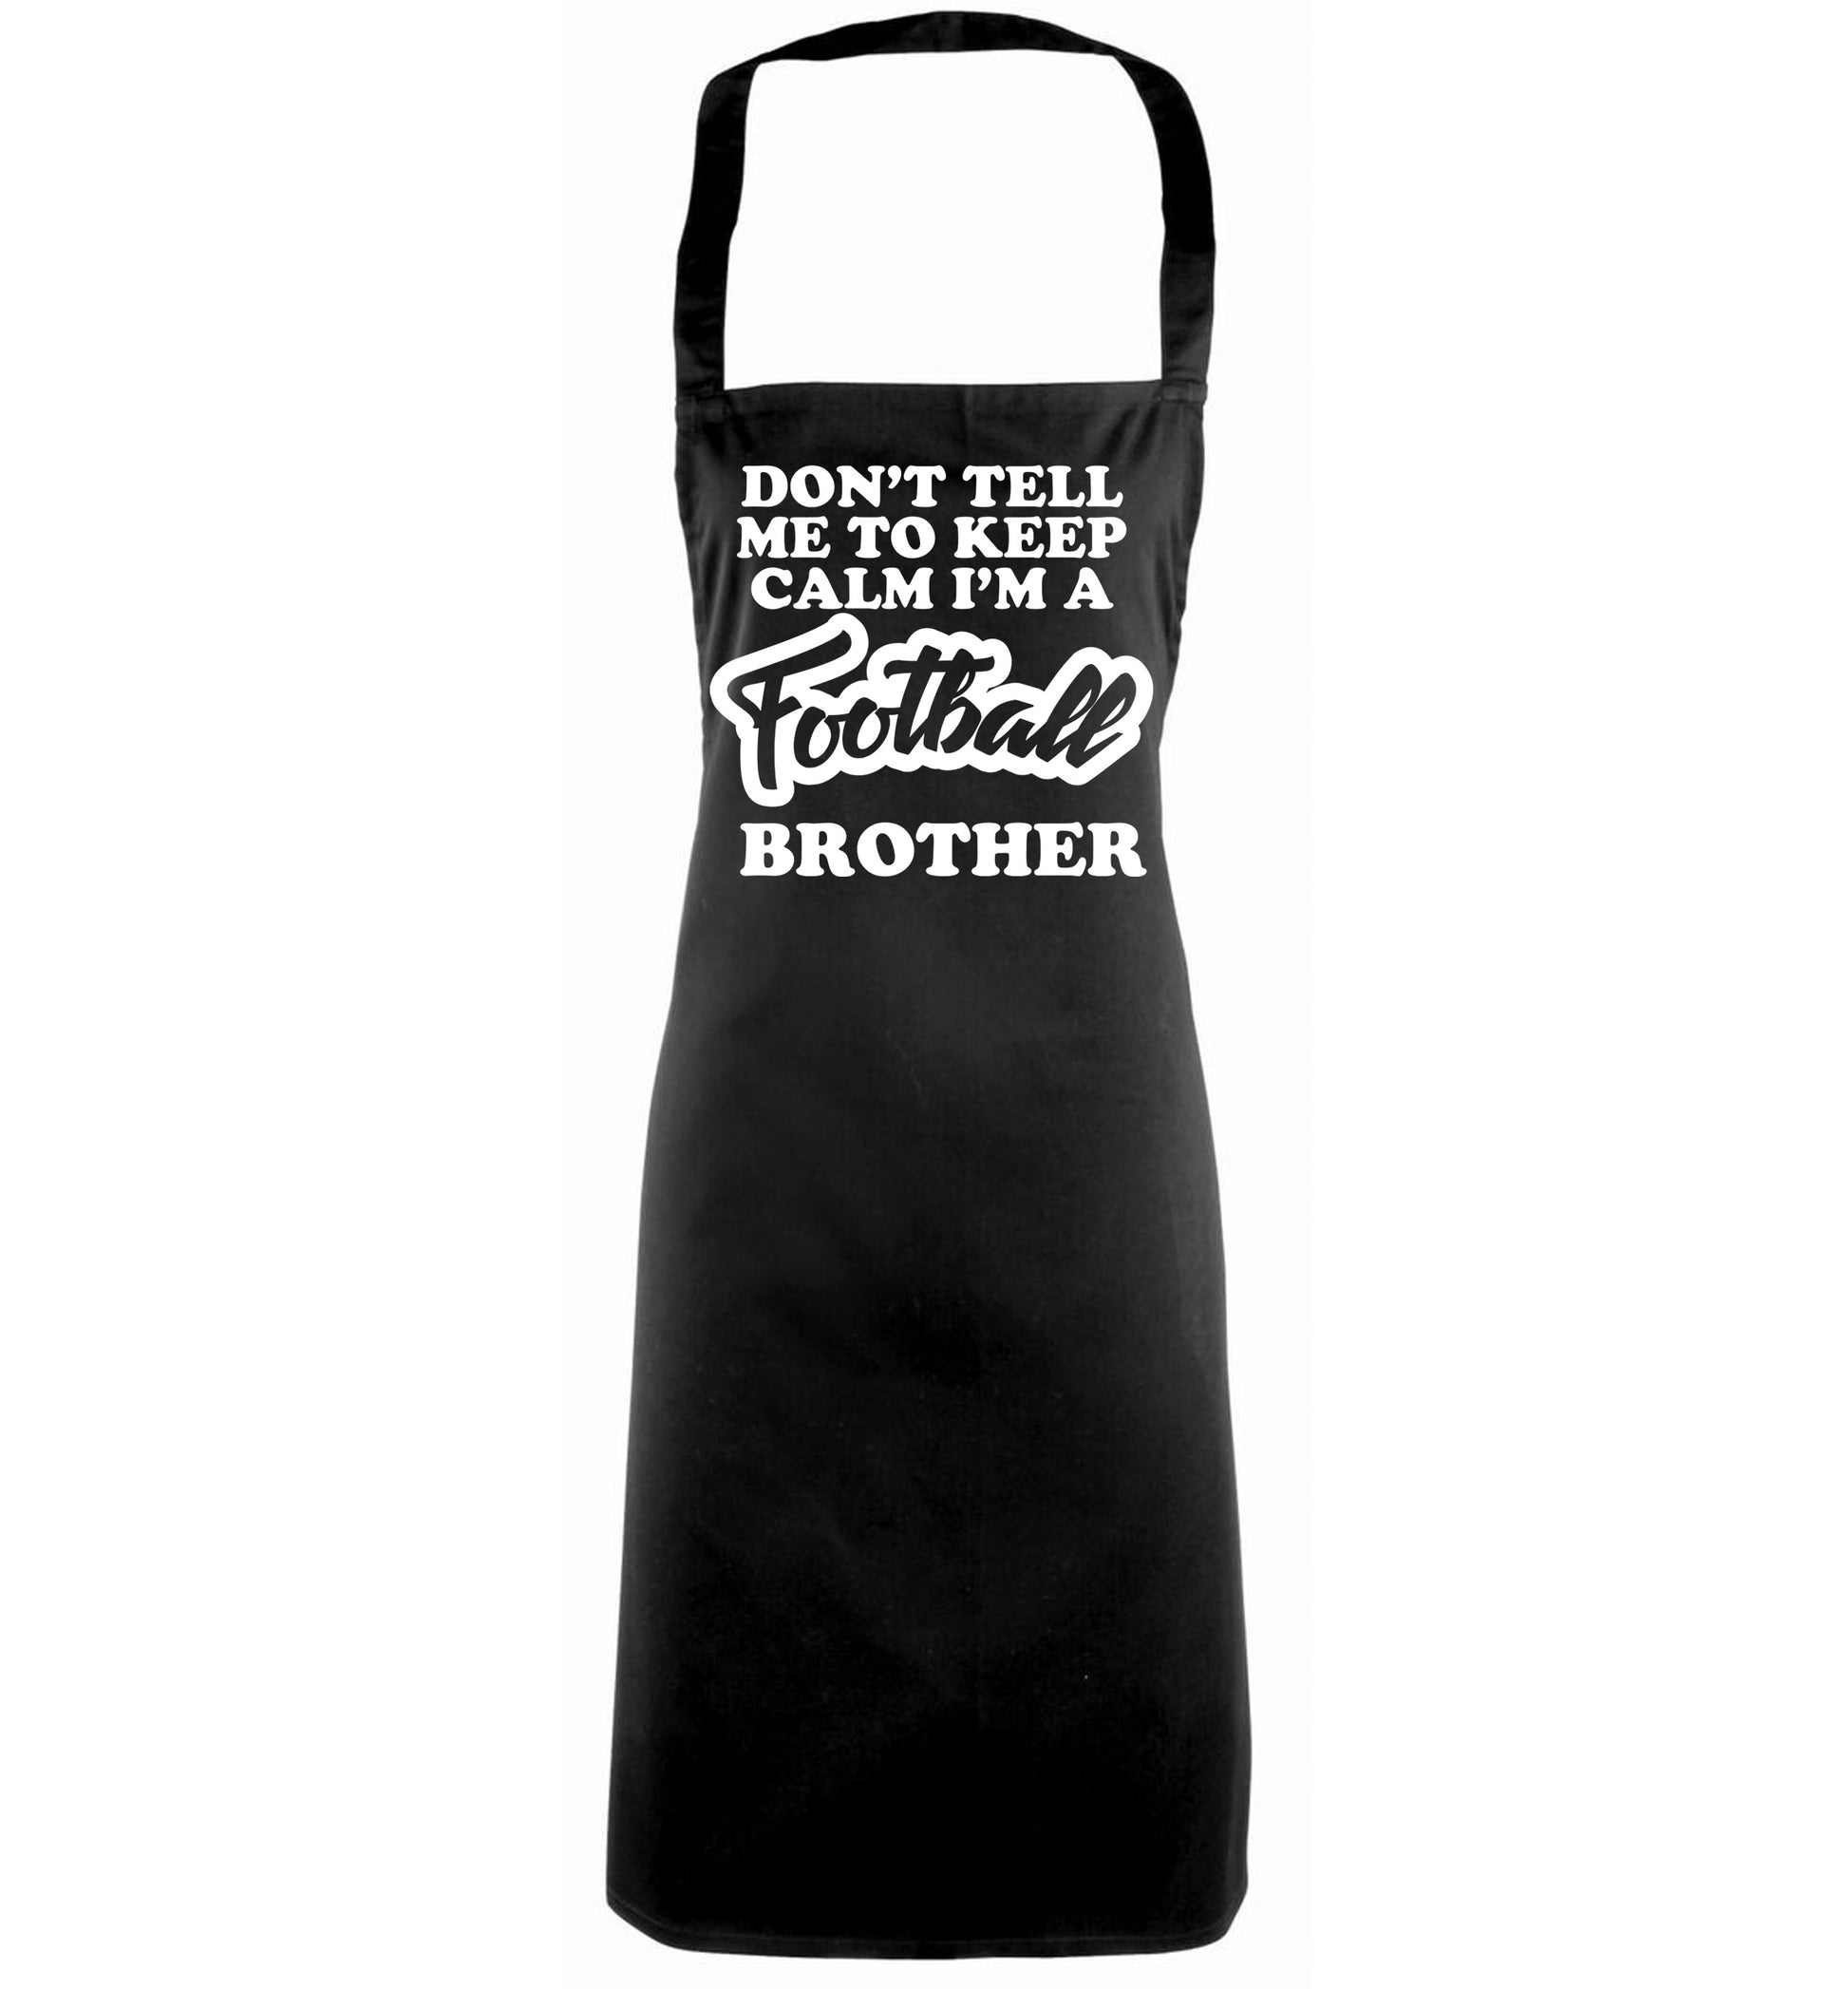 Don't tell me to keep calm I'm a football brother black apron